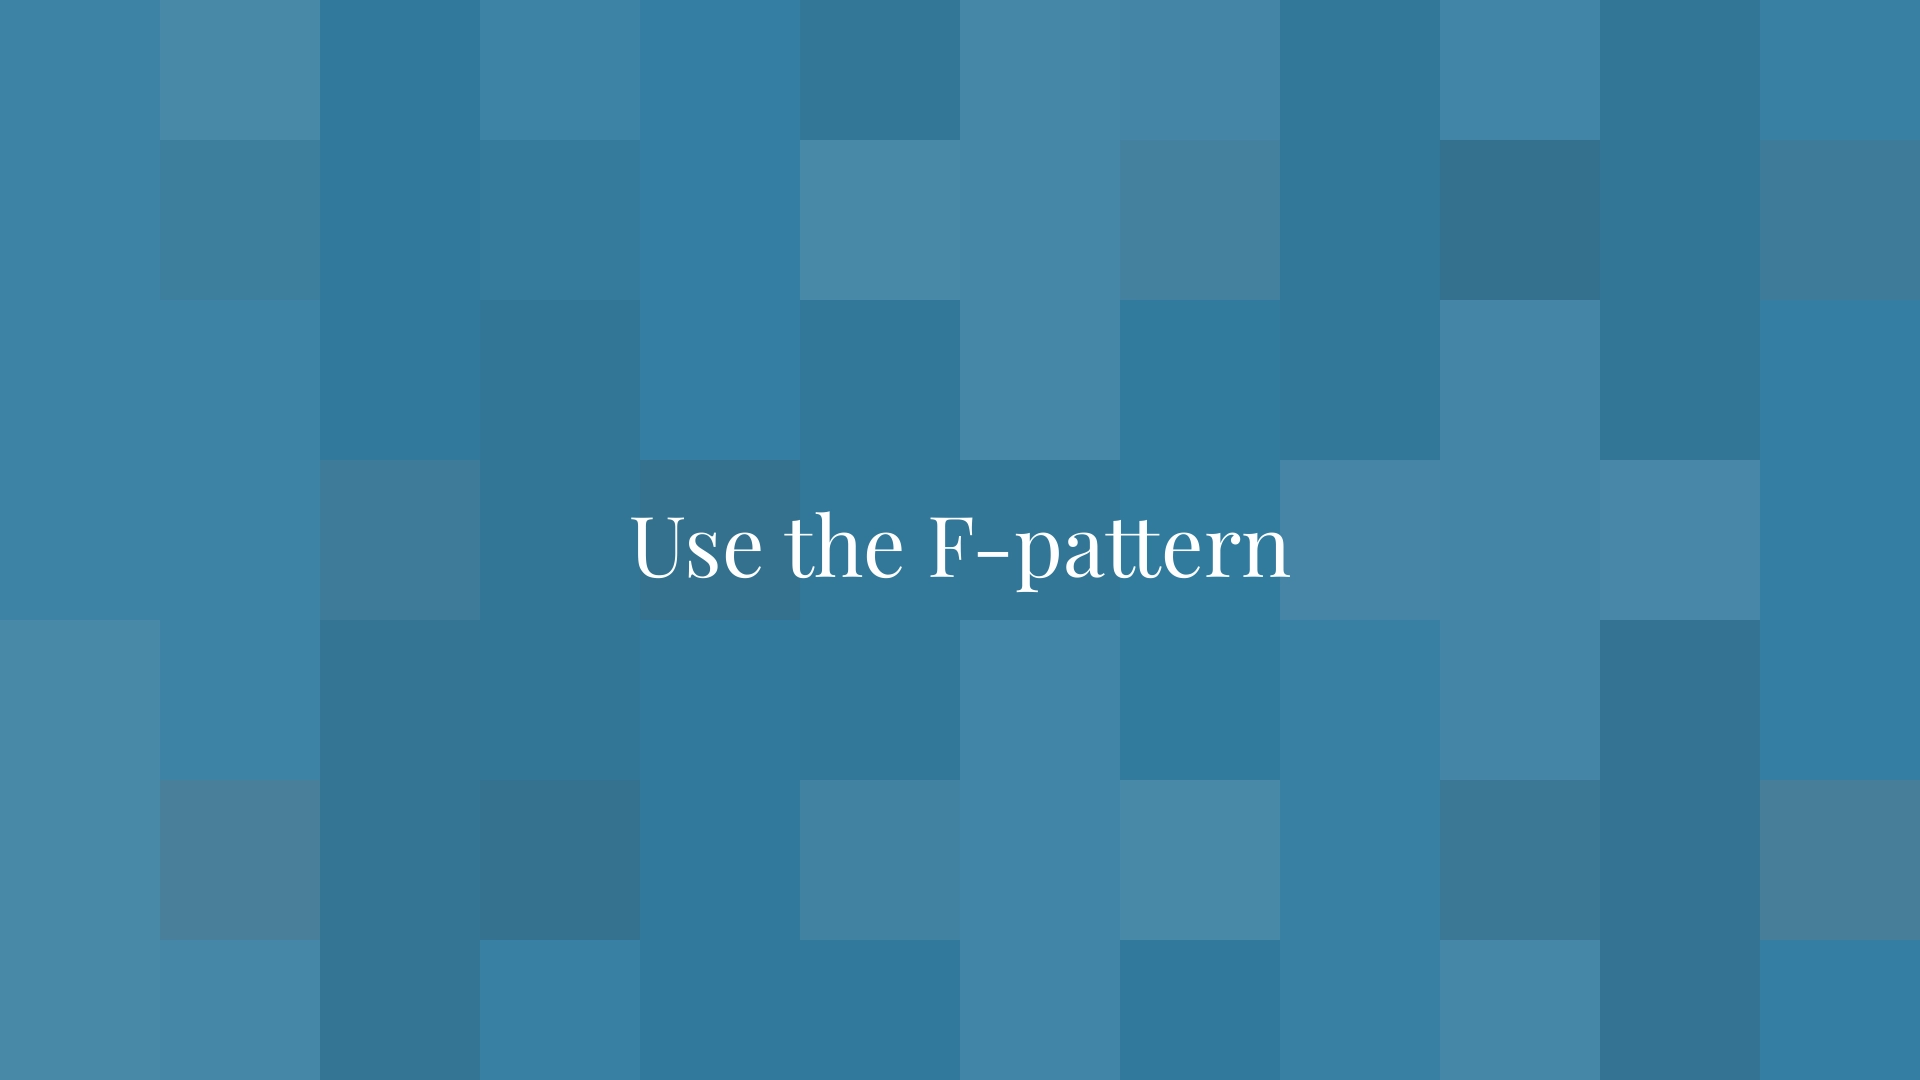 Use the F-pattern